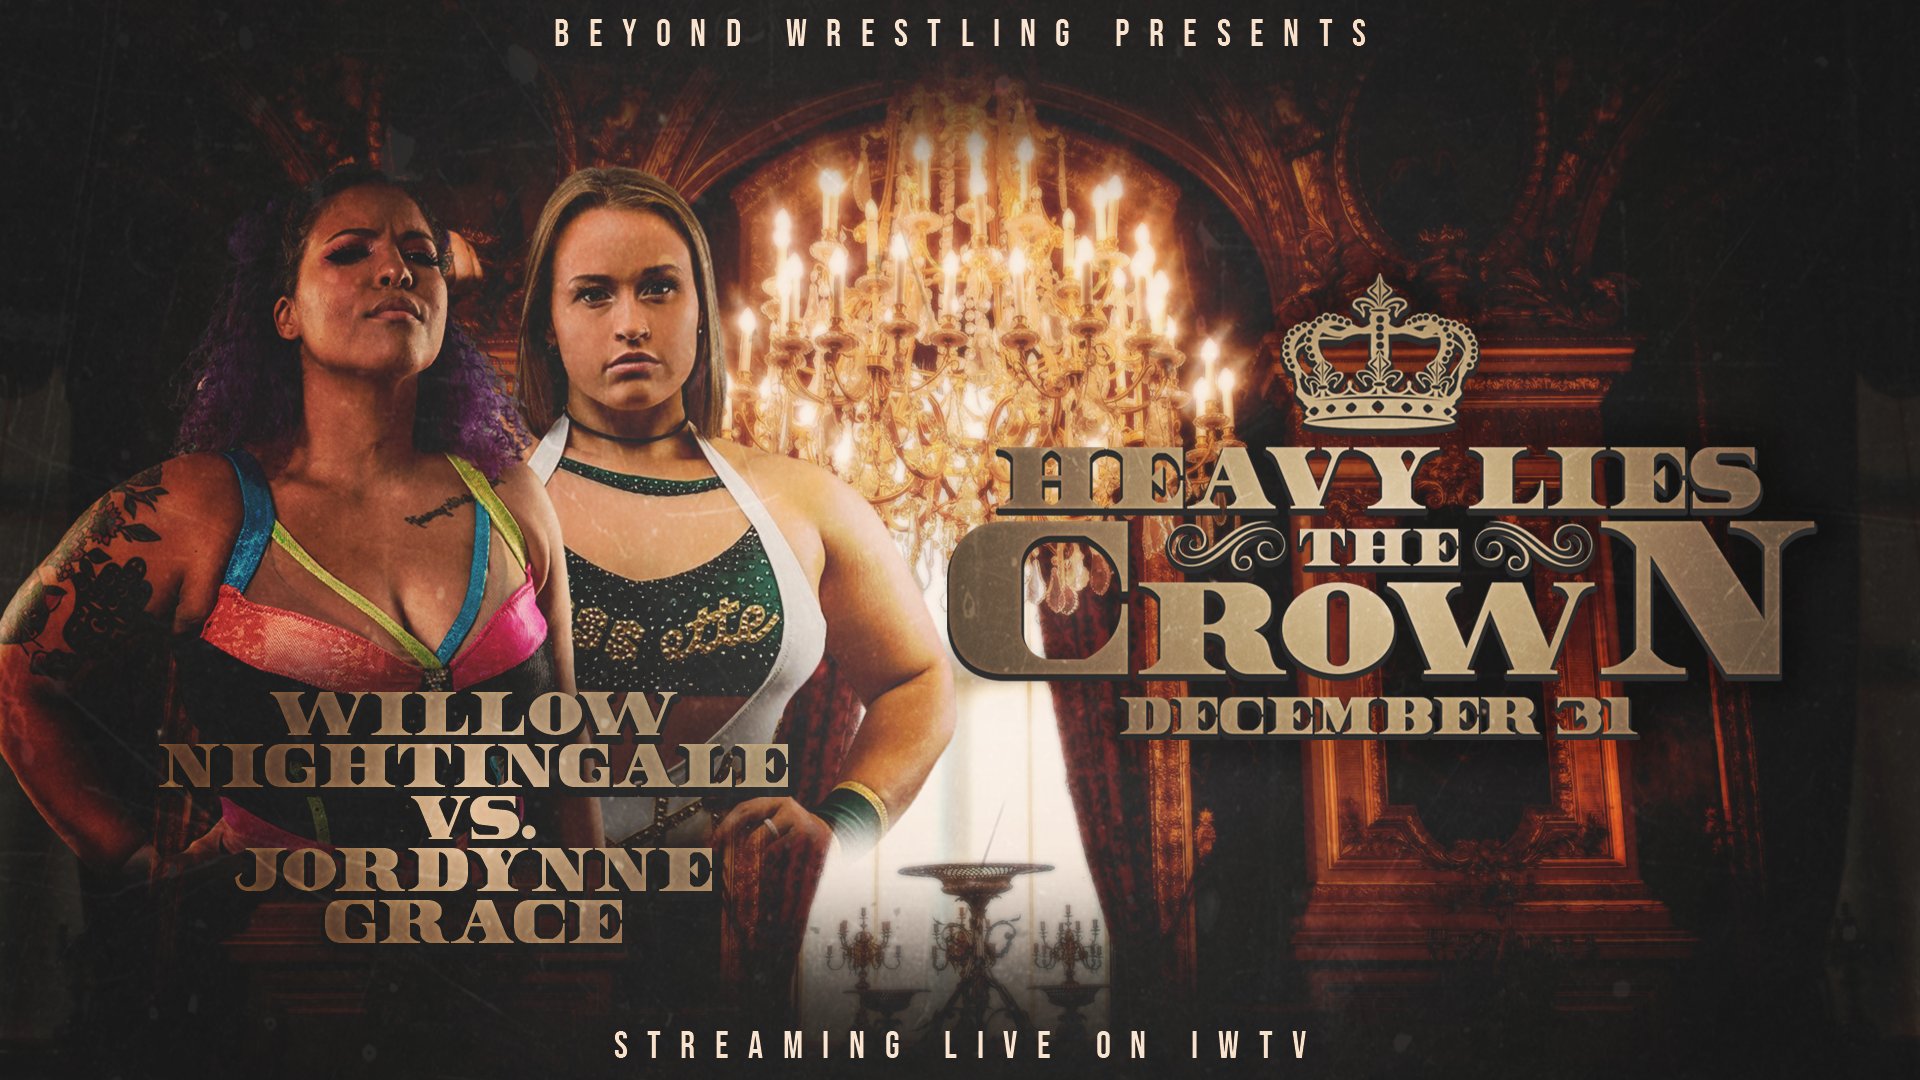 Willow Nightingale to challenge Jordynne Grace for the IMPACT Digital Media Title at Beyond Wrestling event